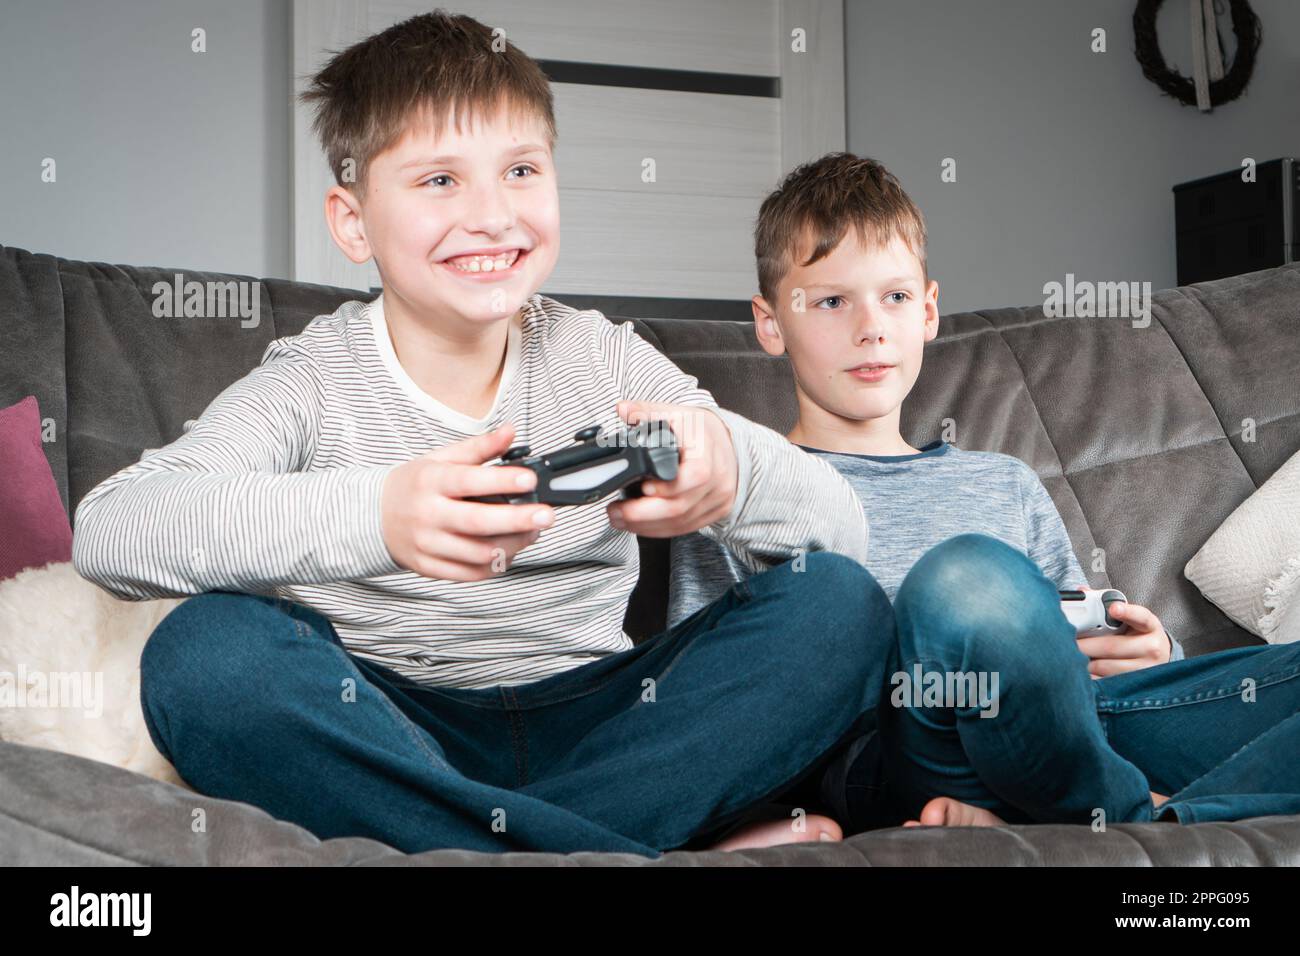 Portrait of two glad teenage boys sitting on grey sofa at home, holding gaming controller joystick, playing videogames. Stock Photo